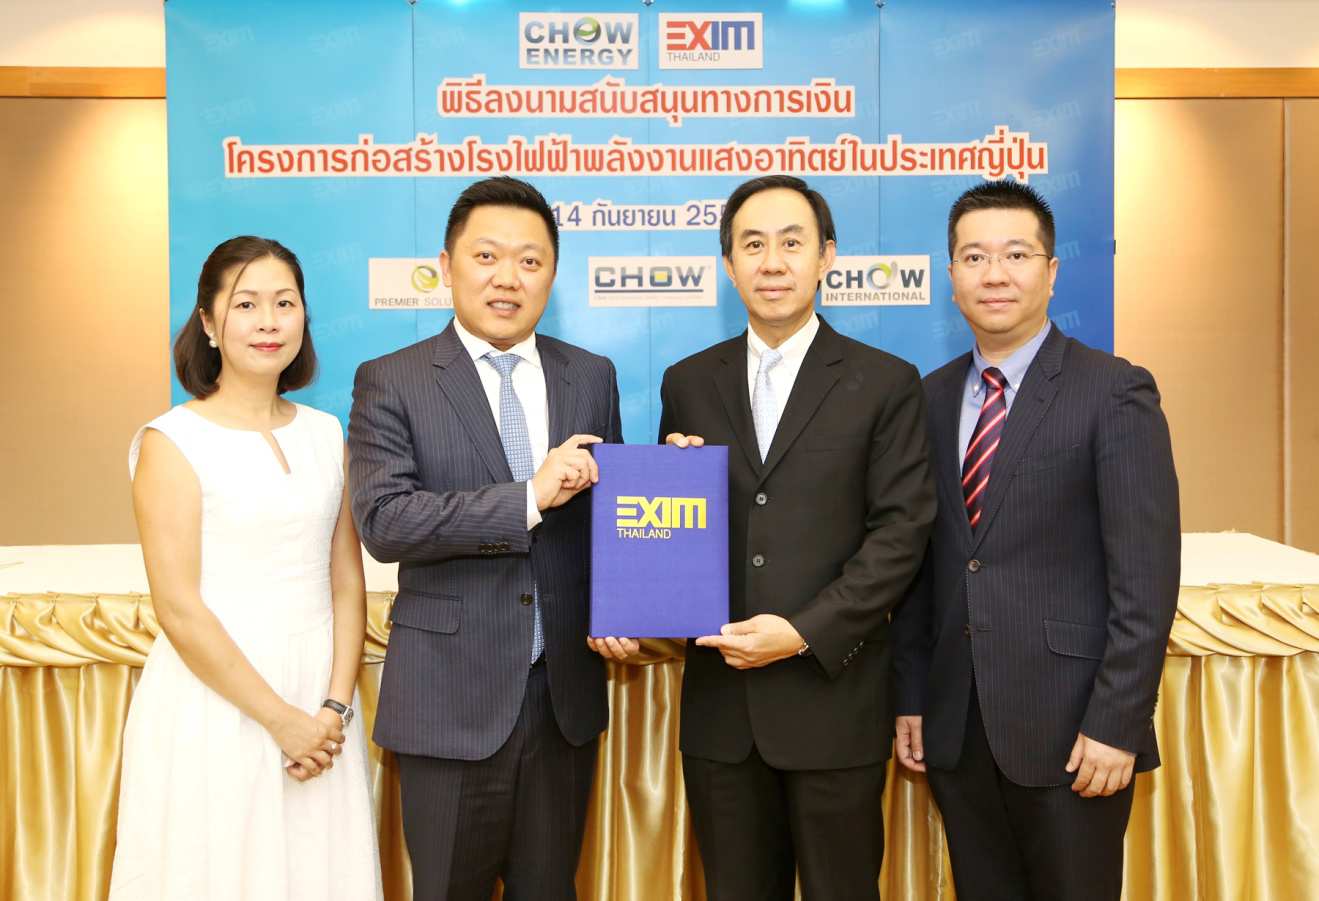 EXIM Thailand Provides Financial Facility to Chow Steel Group’s Solar Farm Projects in Japan